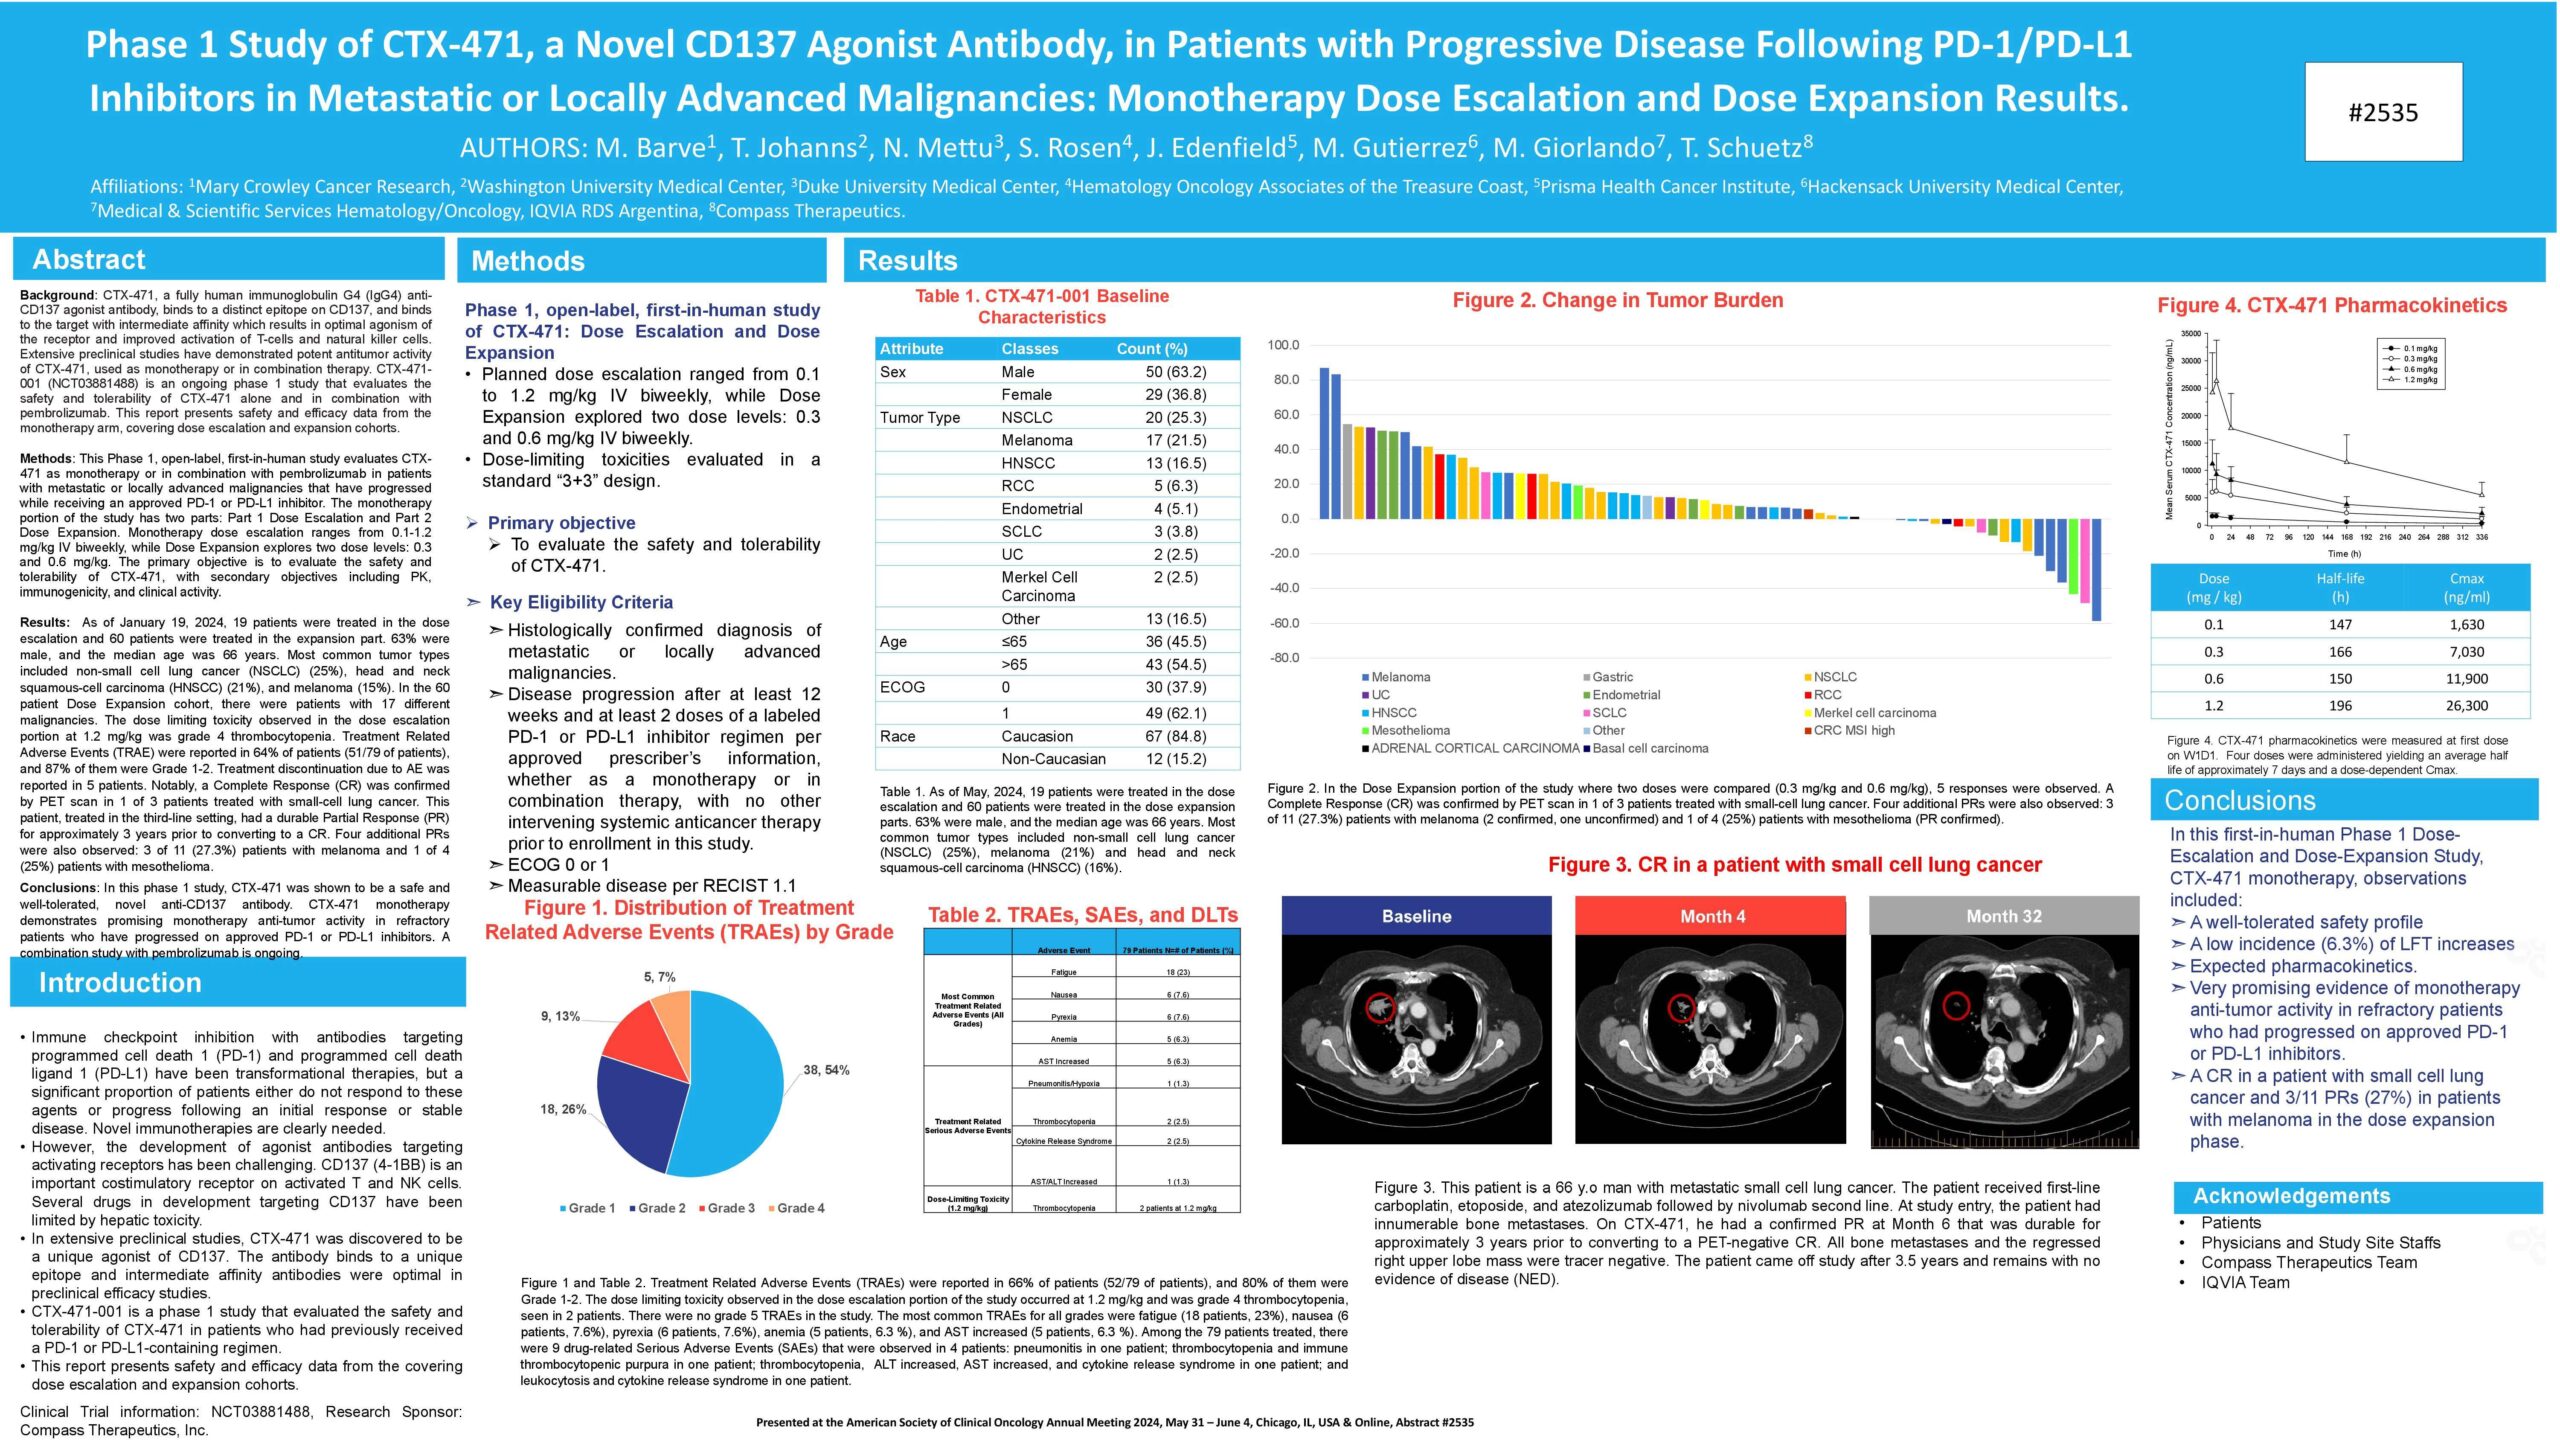 Phase 1 study of CTX-471, a novel CD137 agonist antibody, in patients with progressive disease following PD-1/PD-L1 inhibitors in metastatic or locally advanced malignancies.